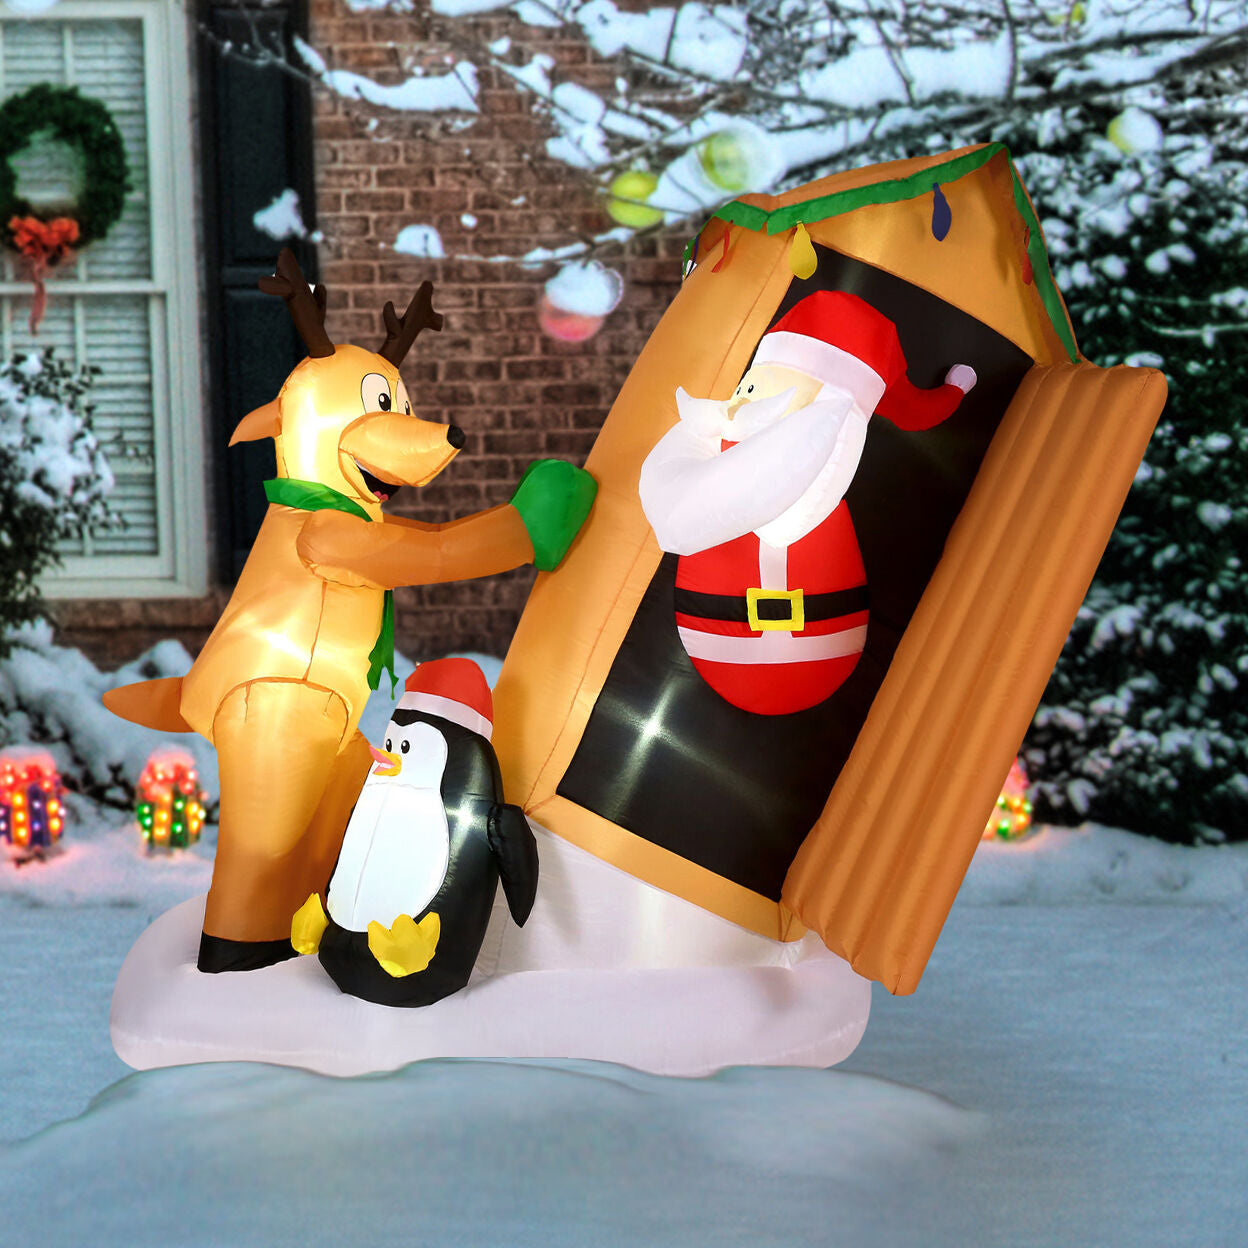 Fraser Hill Farm -  4-Ft. Tall Pre-Lit Inflatable Santa in Outhouse